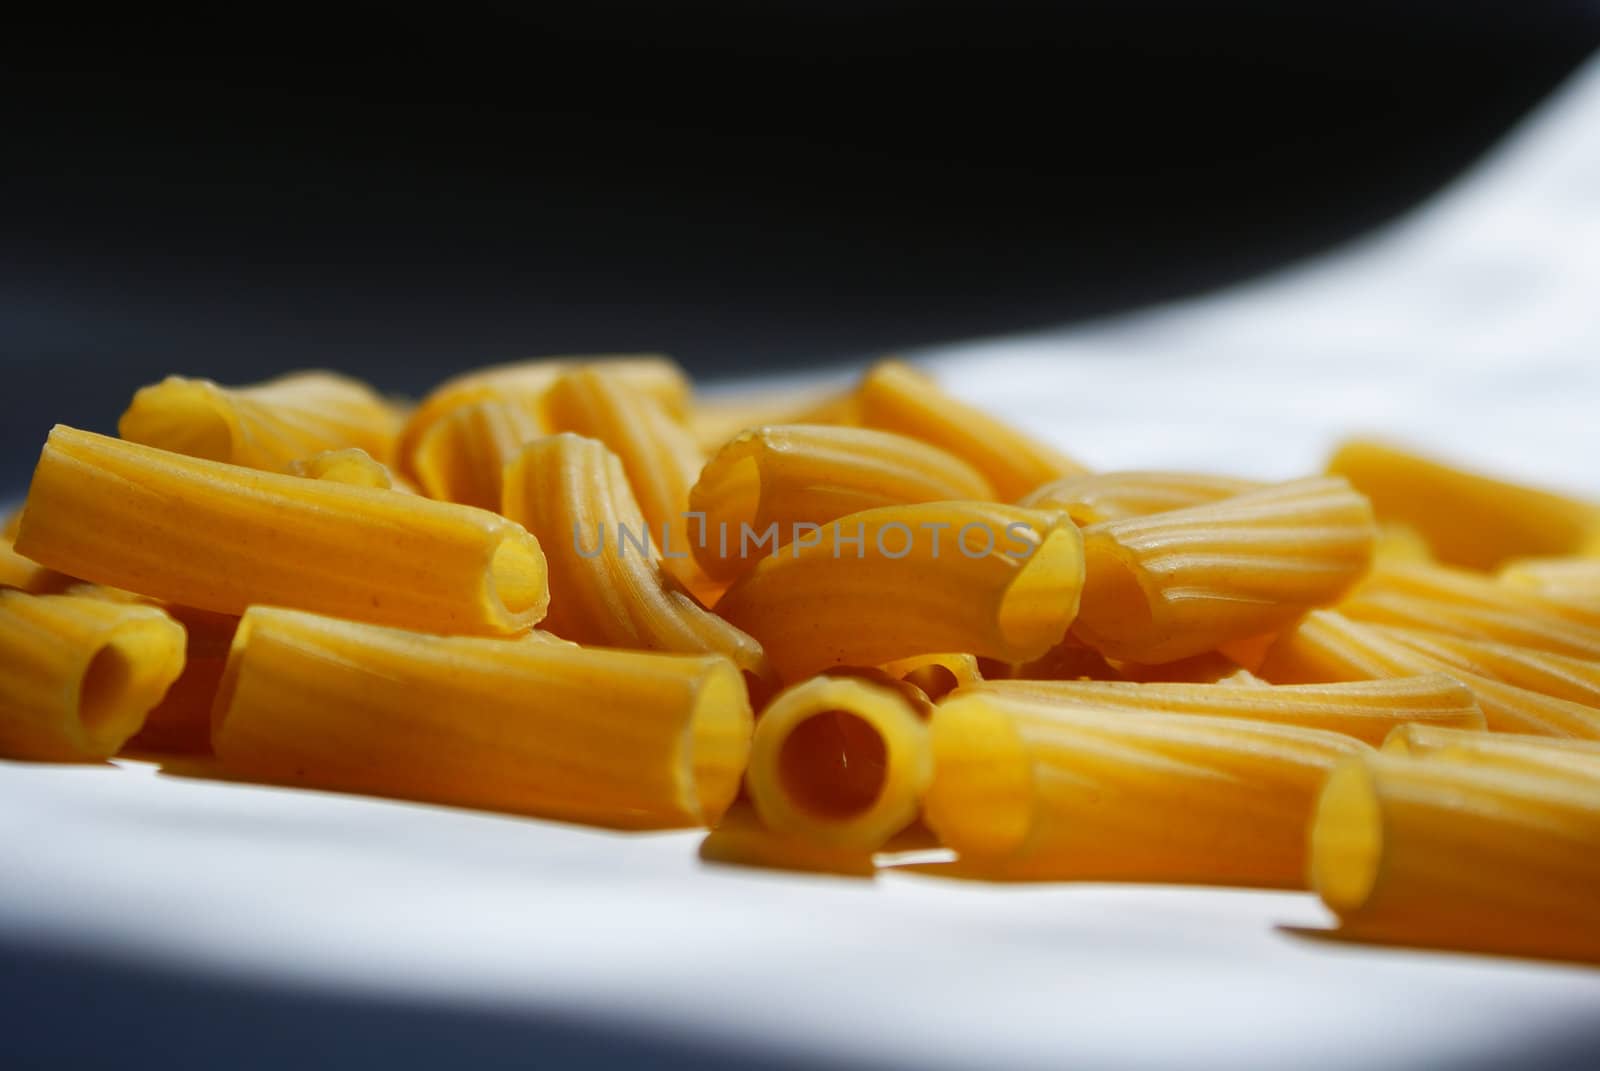 raw macaroni scattered on black and white background